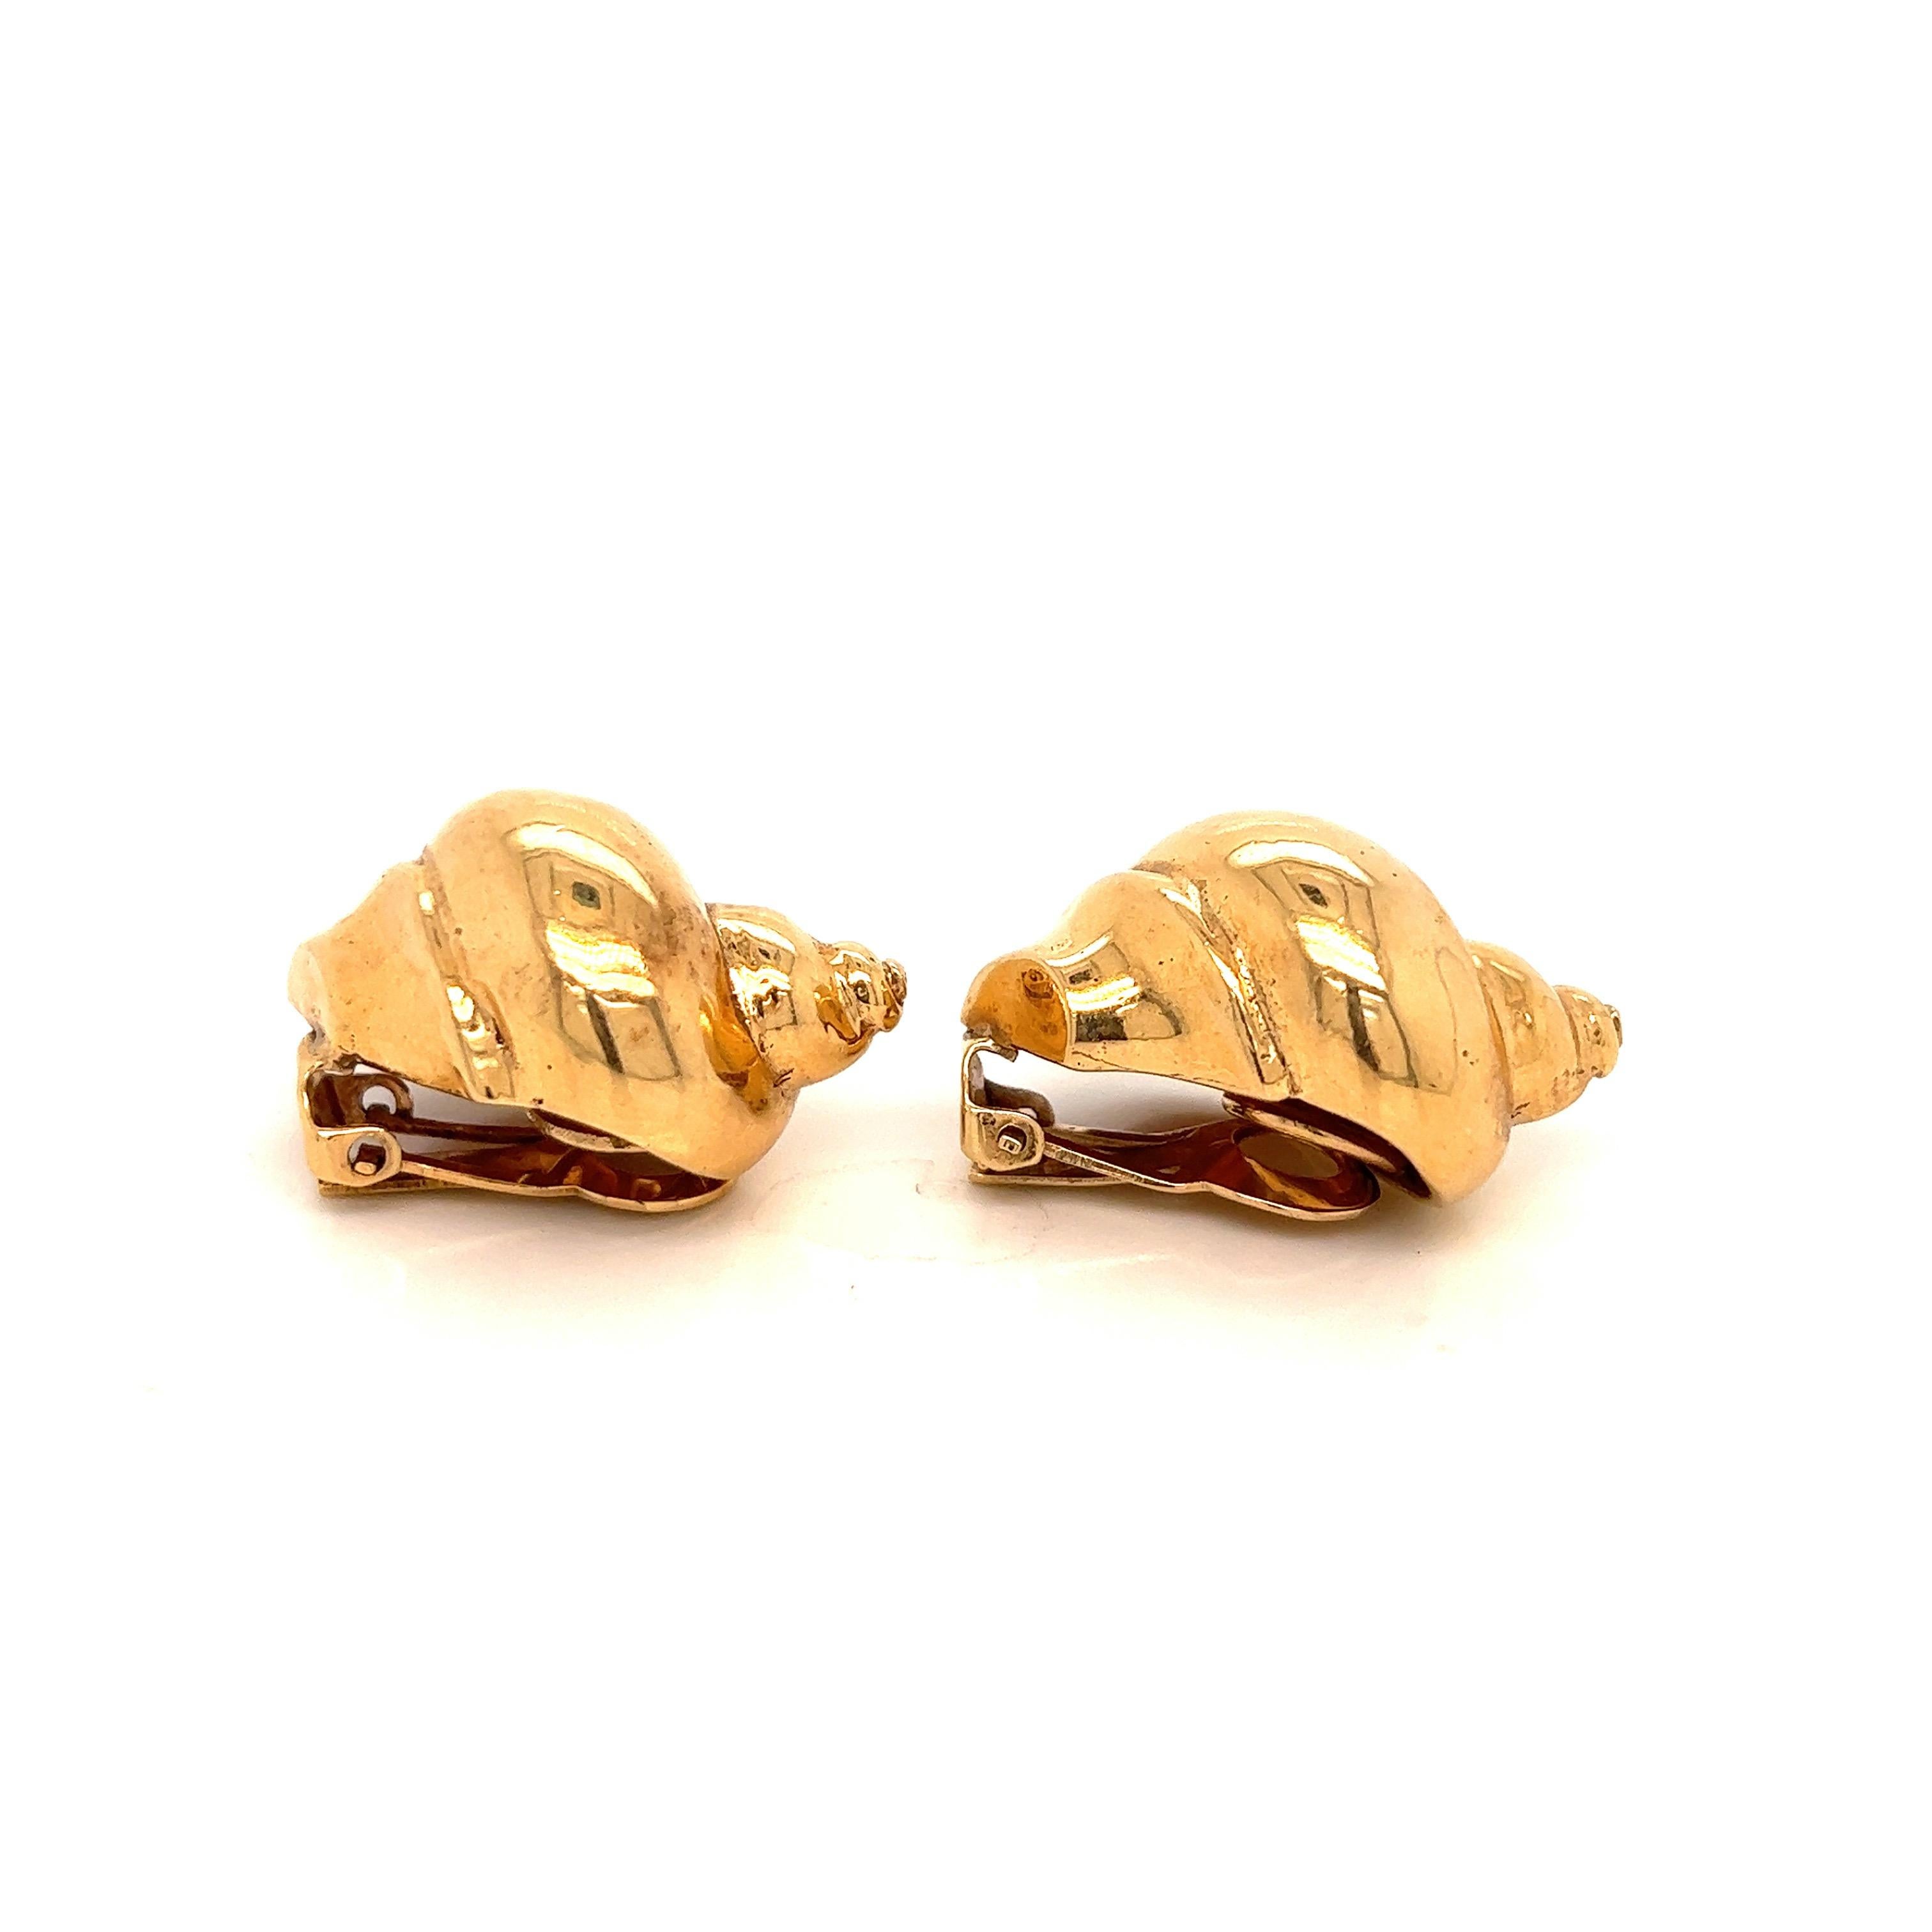 Seaman Schepps Gold Shell Ear Clips In Excellent Condition For Sale In New York, NY